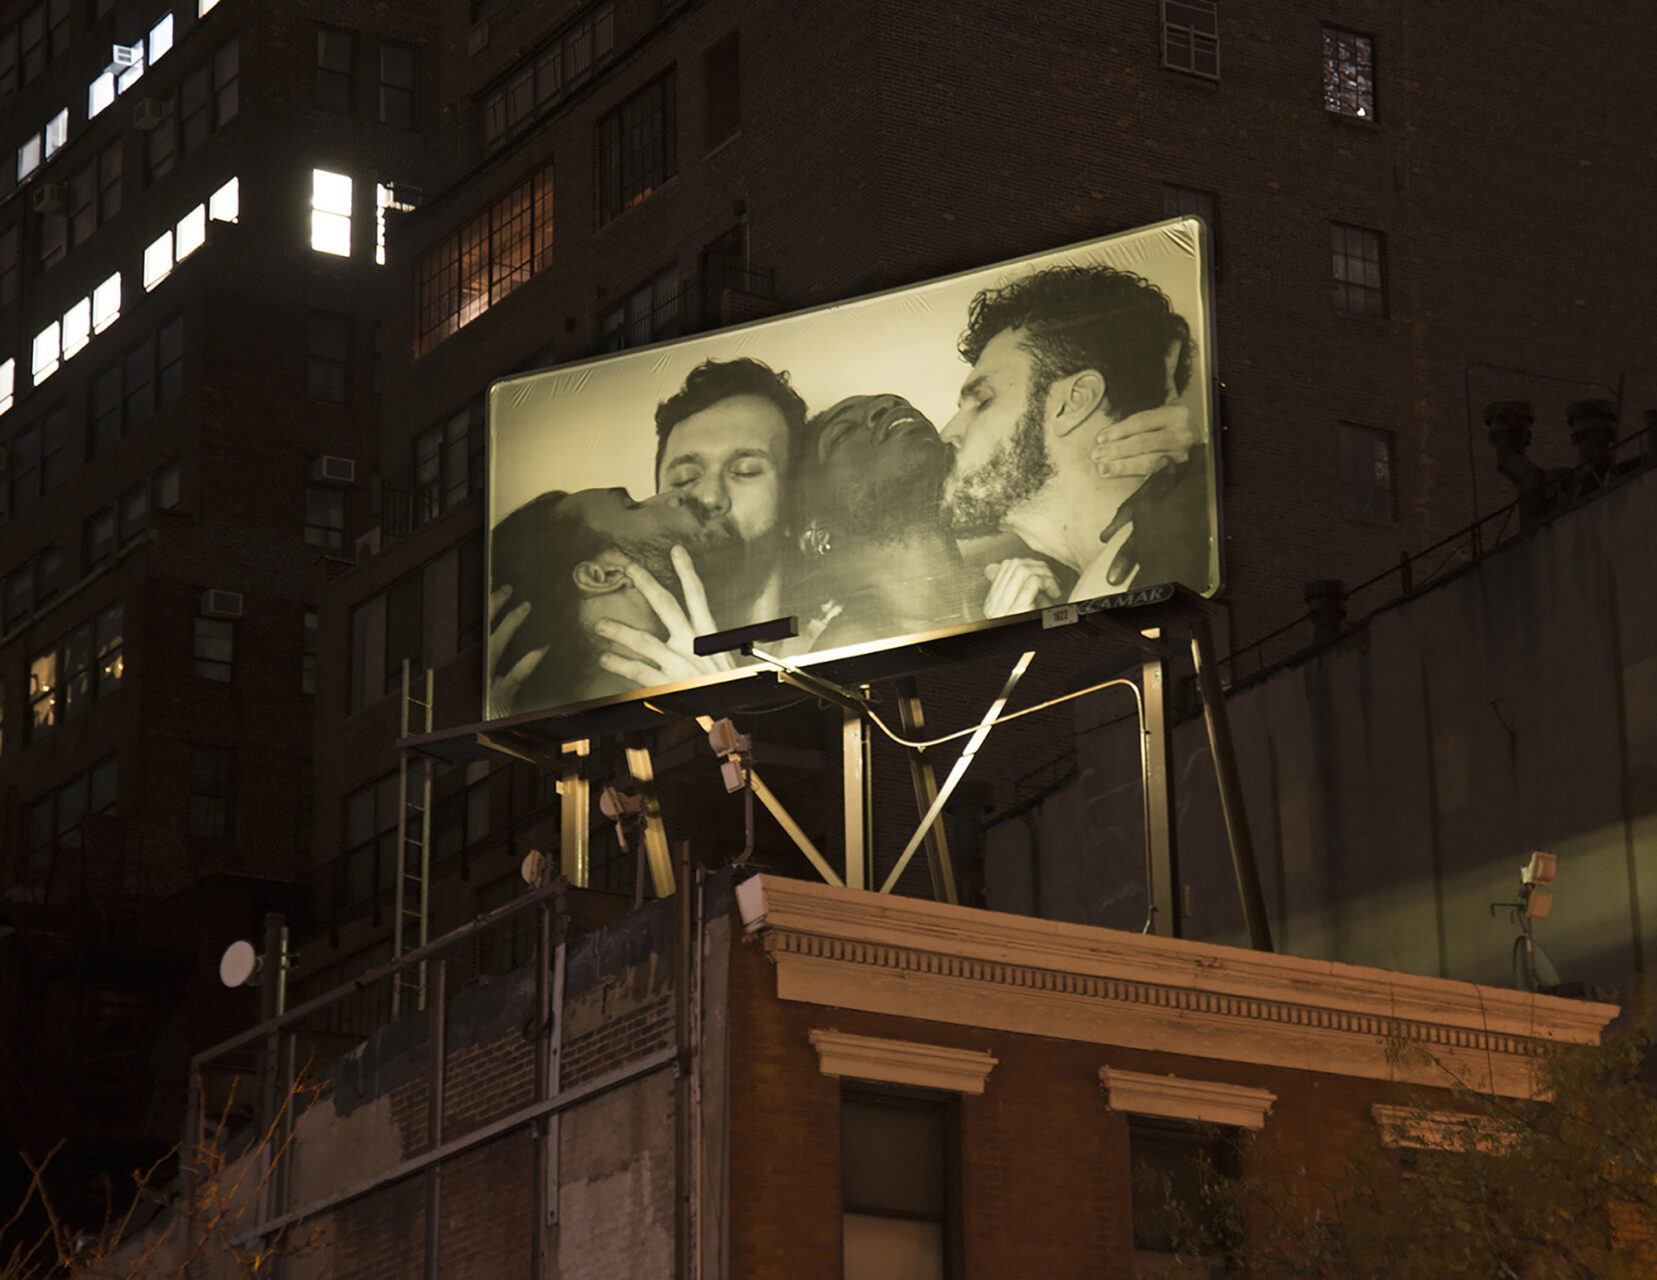 Camilo Godoy, AMIGXS (Self-portrait with Brendan, Carlos, and Jorge), 2017. Installation view at night of billboard produced by the International Studio & Curatorial Program (ISCP) at the Southeast corner of Ninth Avenue and 37th Street, Manhattan. Courtesy of the artist; PROXYCO Gallery, New York; and Dot Fiftyone Gallery, Miami.